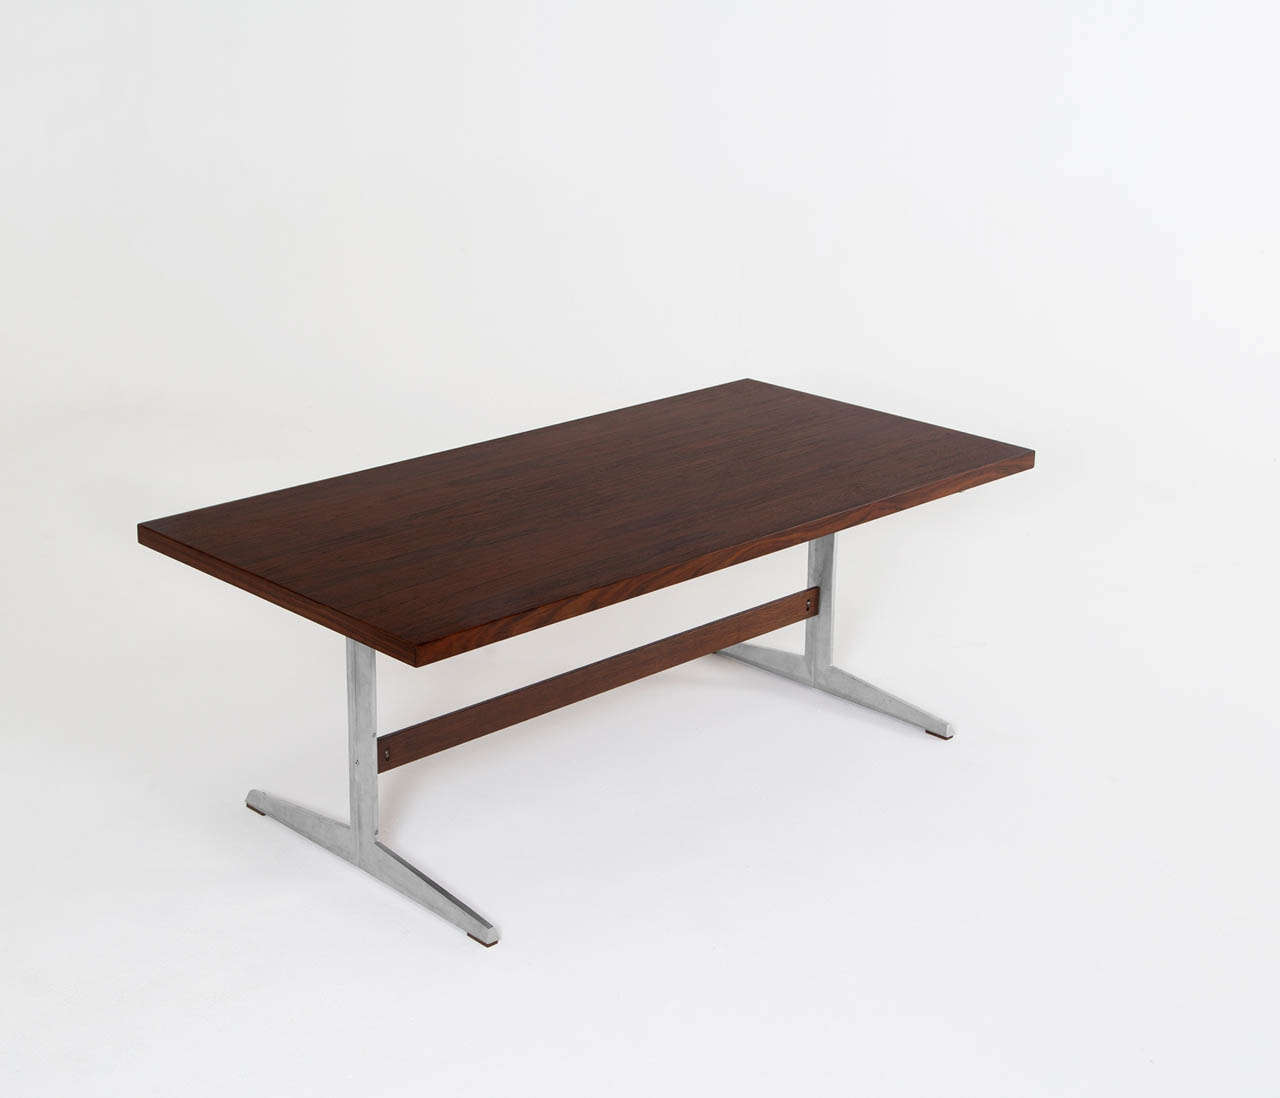 Executive desk, rosewood, aluminum, Denmark, ca. 1960.

This modest table is executed with rosewood and aluminum. The table features simplistic design features. The desk is executed with two trestle feet and a horizontal rosewood beam. The top is